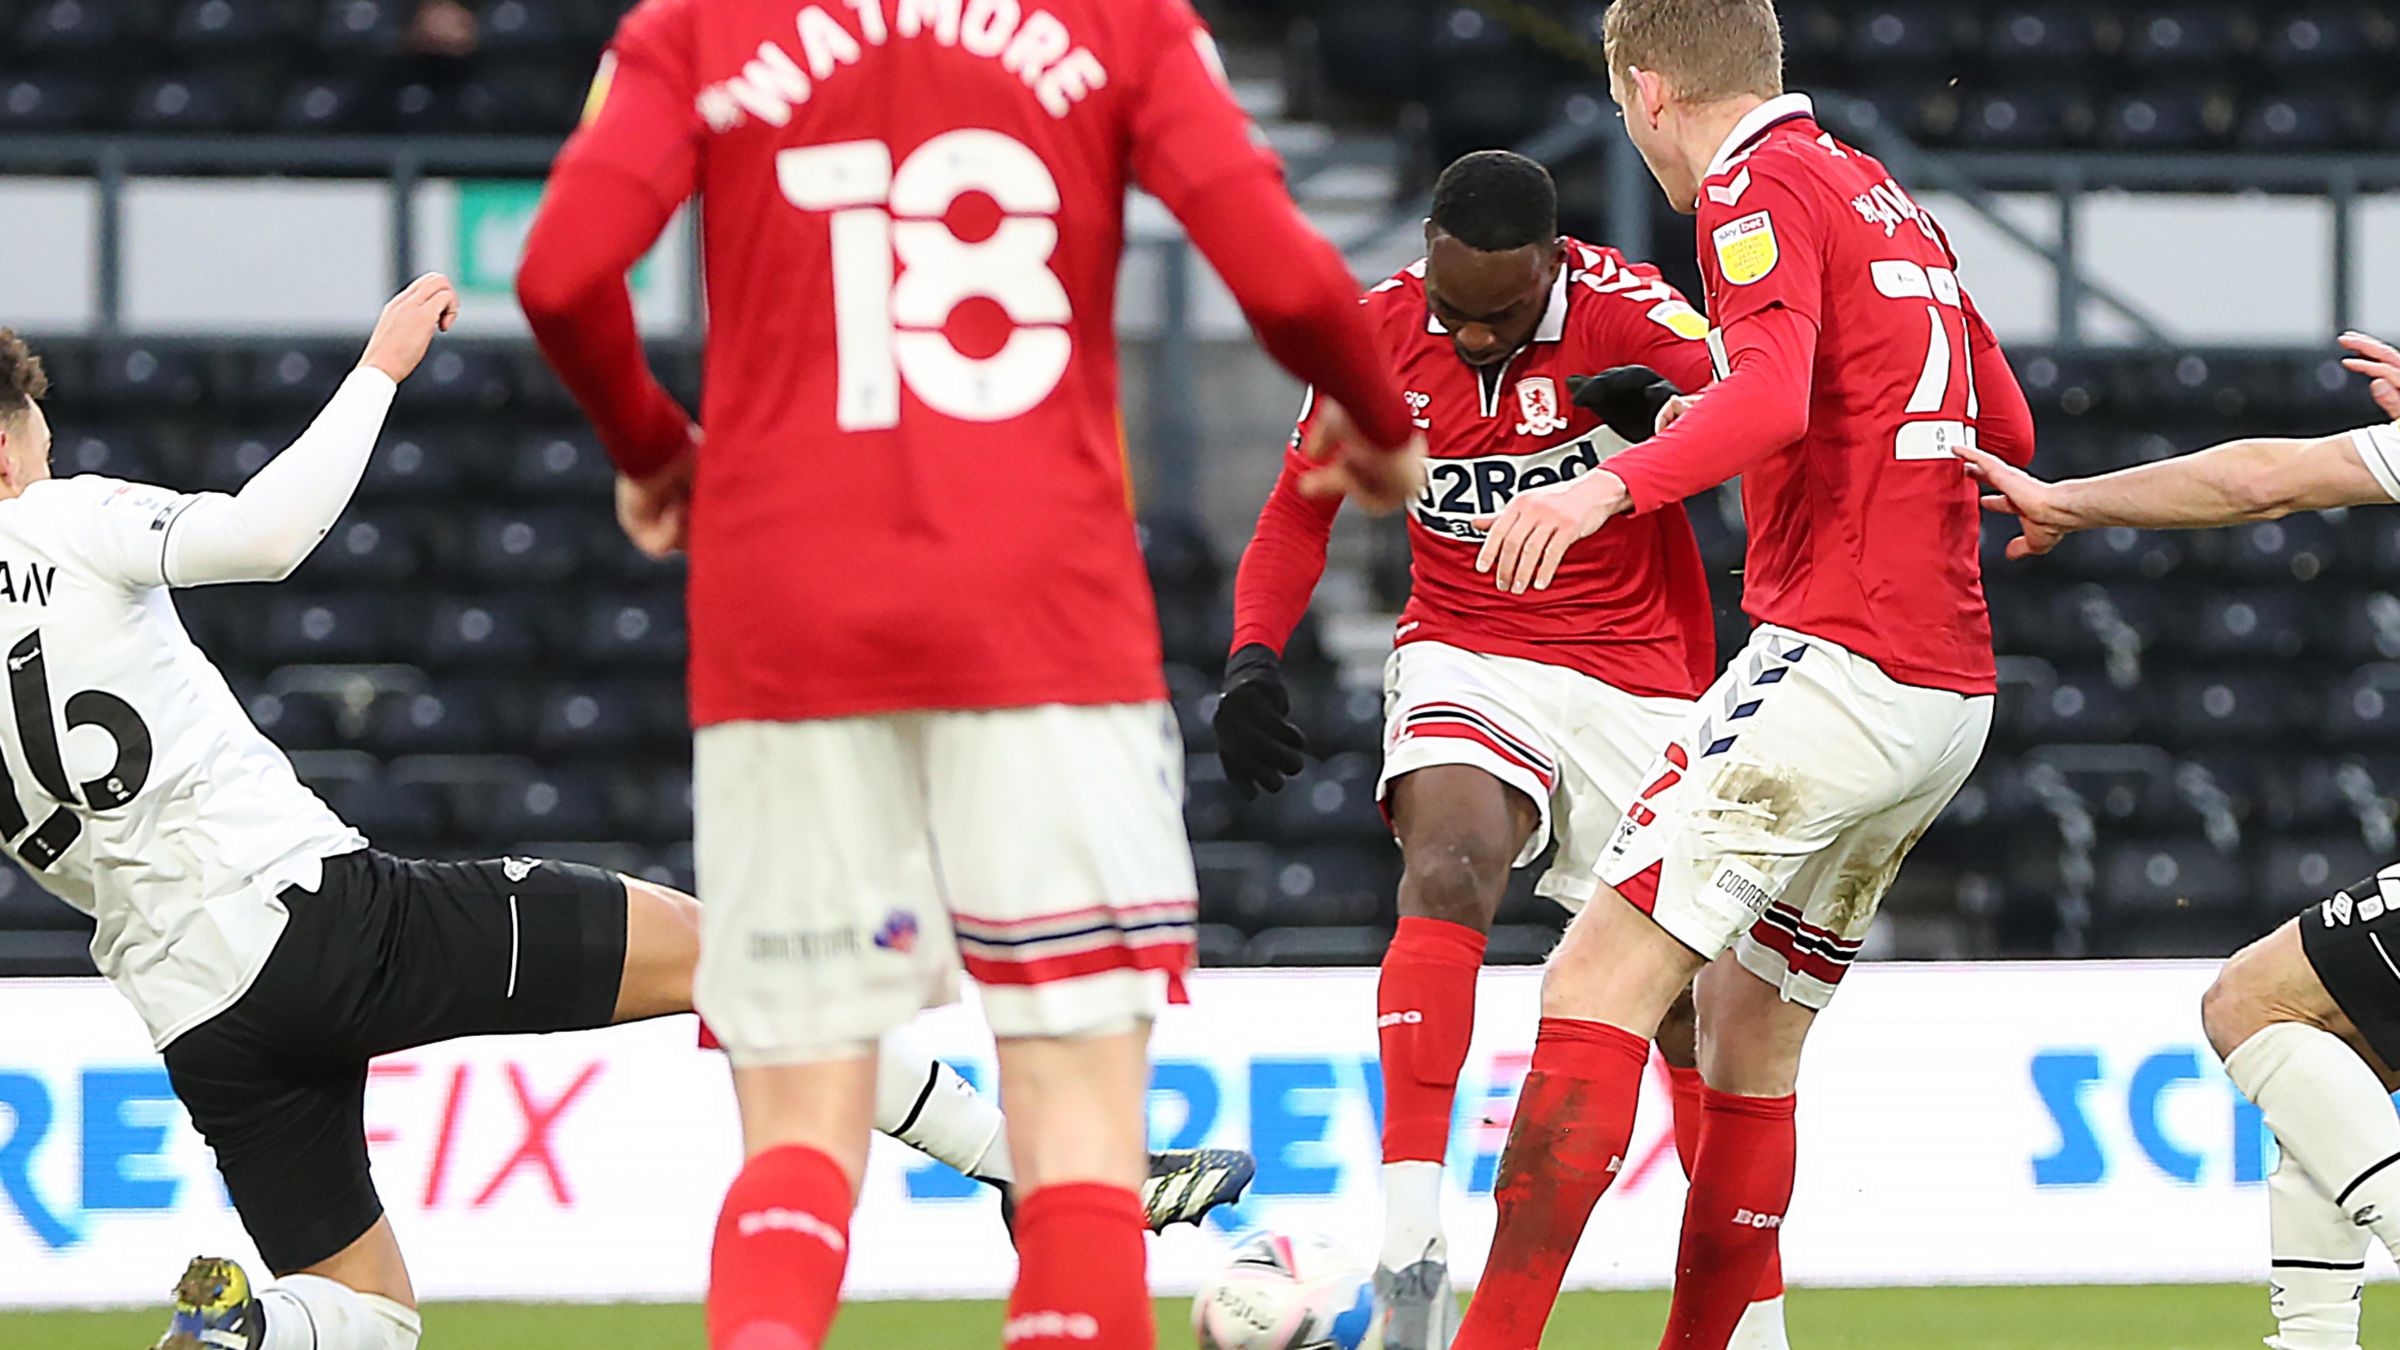 Foot/Angleterre : Neeskens Kebano ouvre son compteur buts avec Middlesbrough